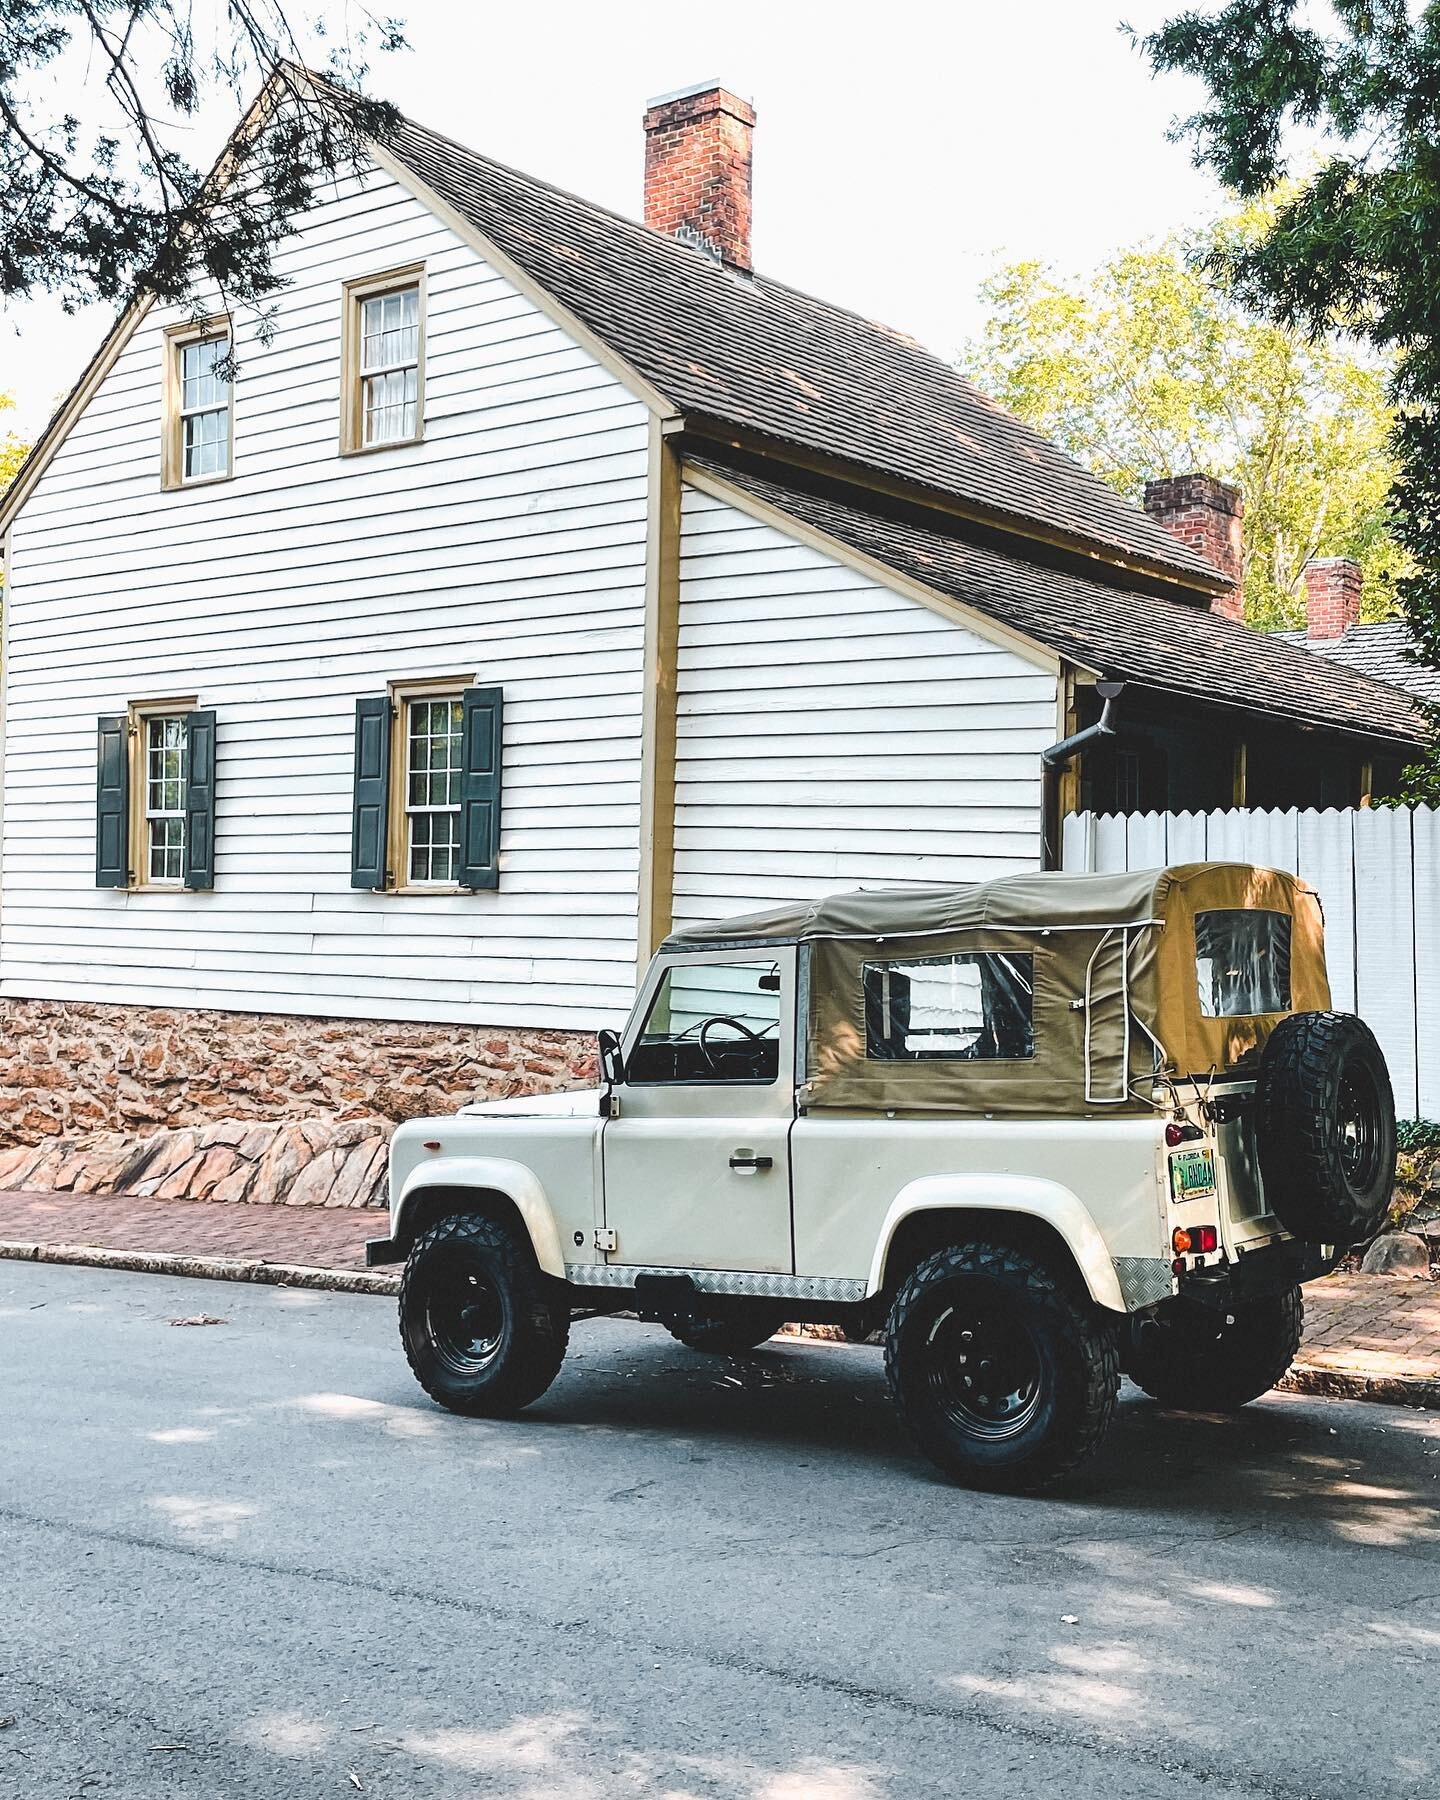 If your morning commute isn&rsquo;t fun, get a vehicle that makes it so. 

Hit us up for options. 

#landrover #defender #d90 #softtop90 #summervibes #mountainlife #lakelife #wsnc #winstonsalem #best4x4xfar